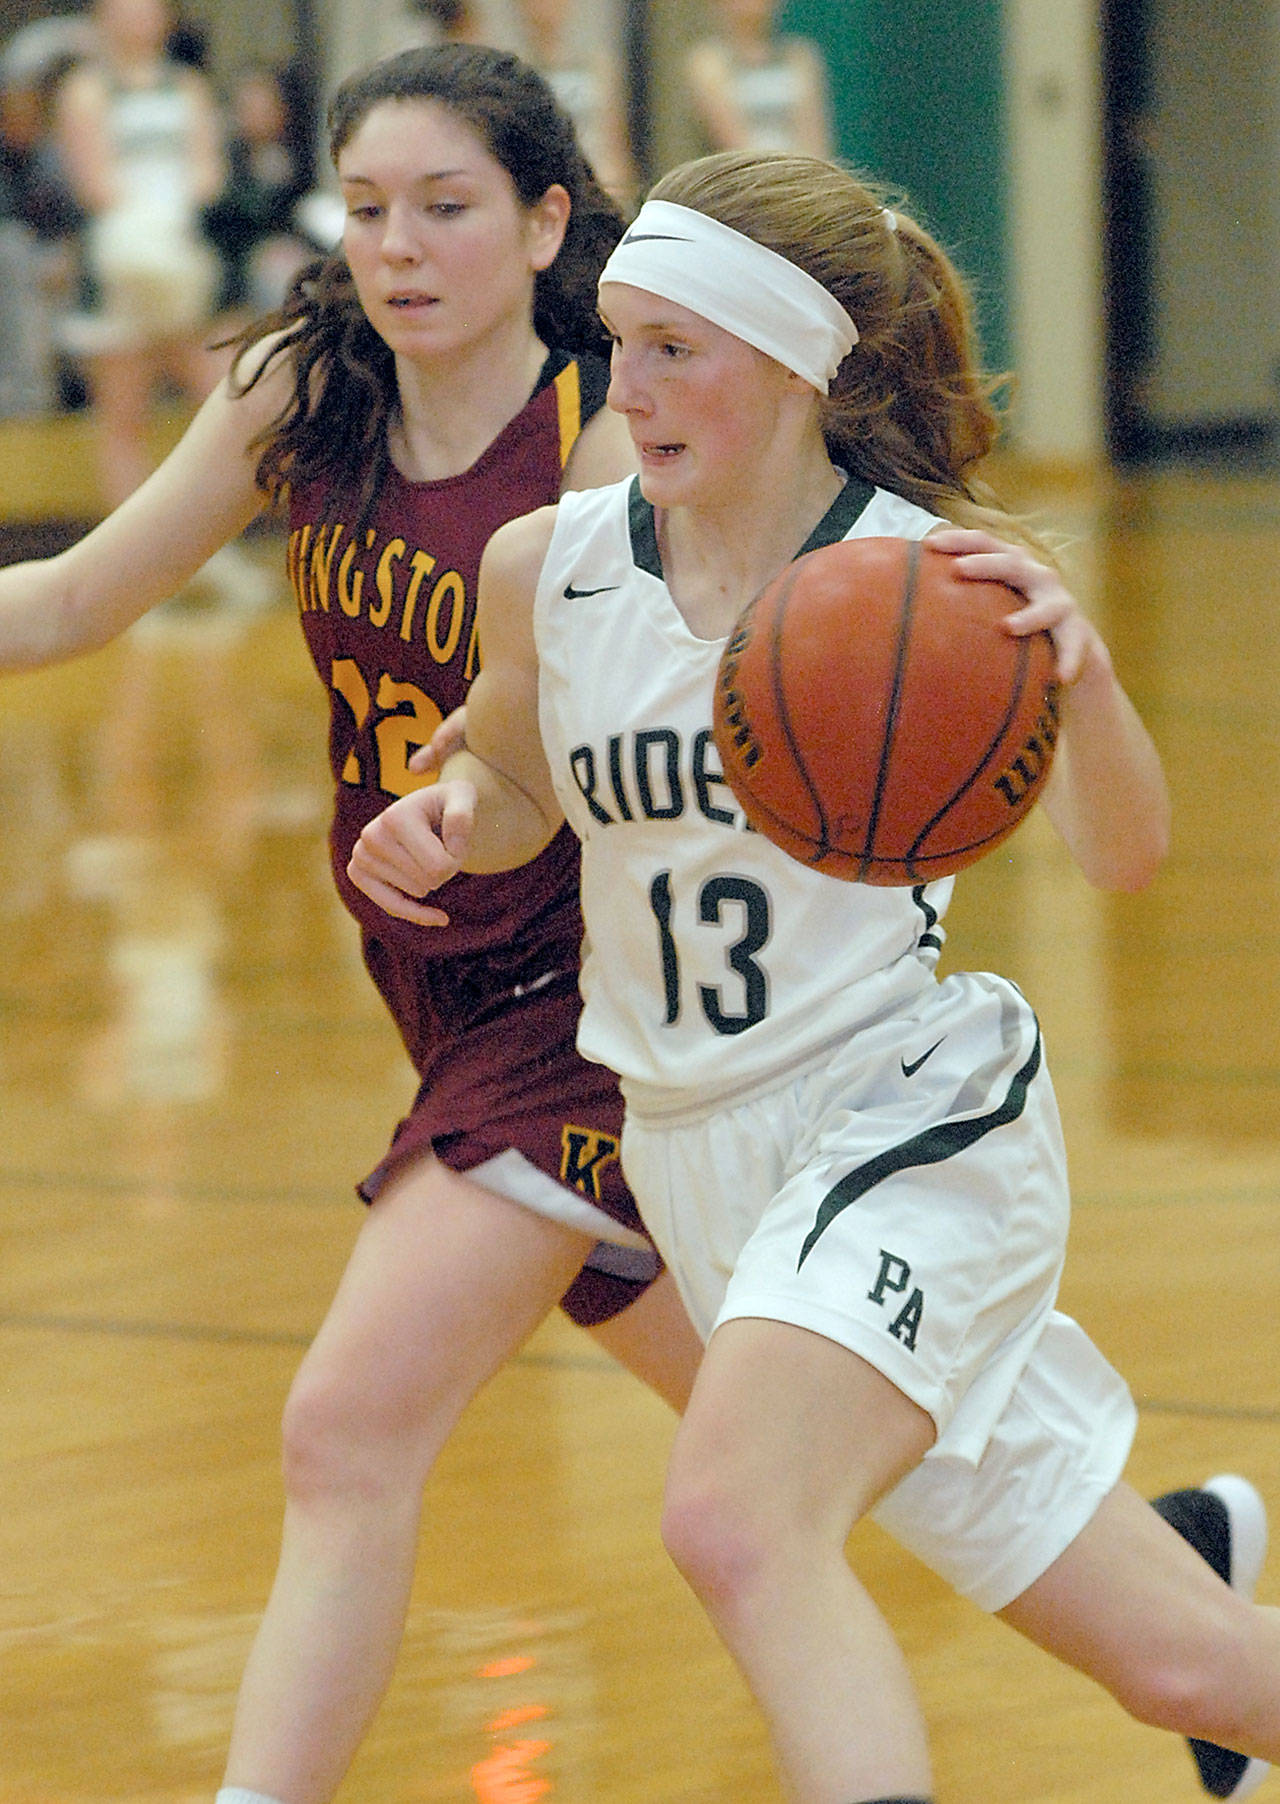 Keith Thorpe/Peninsula Daily News Port Angeles’ Millie Long sweeps past Kingston’s Lily Beaulieu in the second quarter on Friday night at Port Angeles High School.